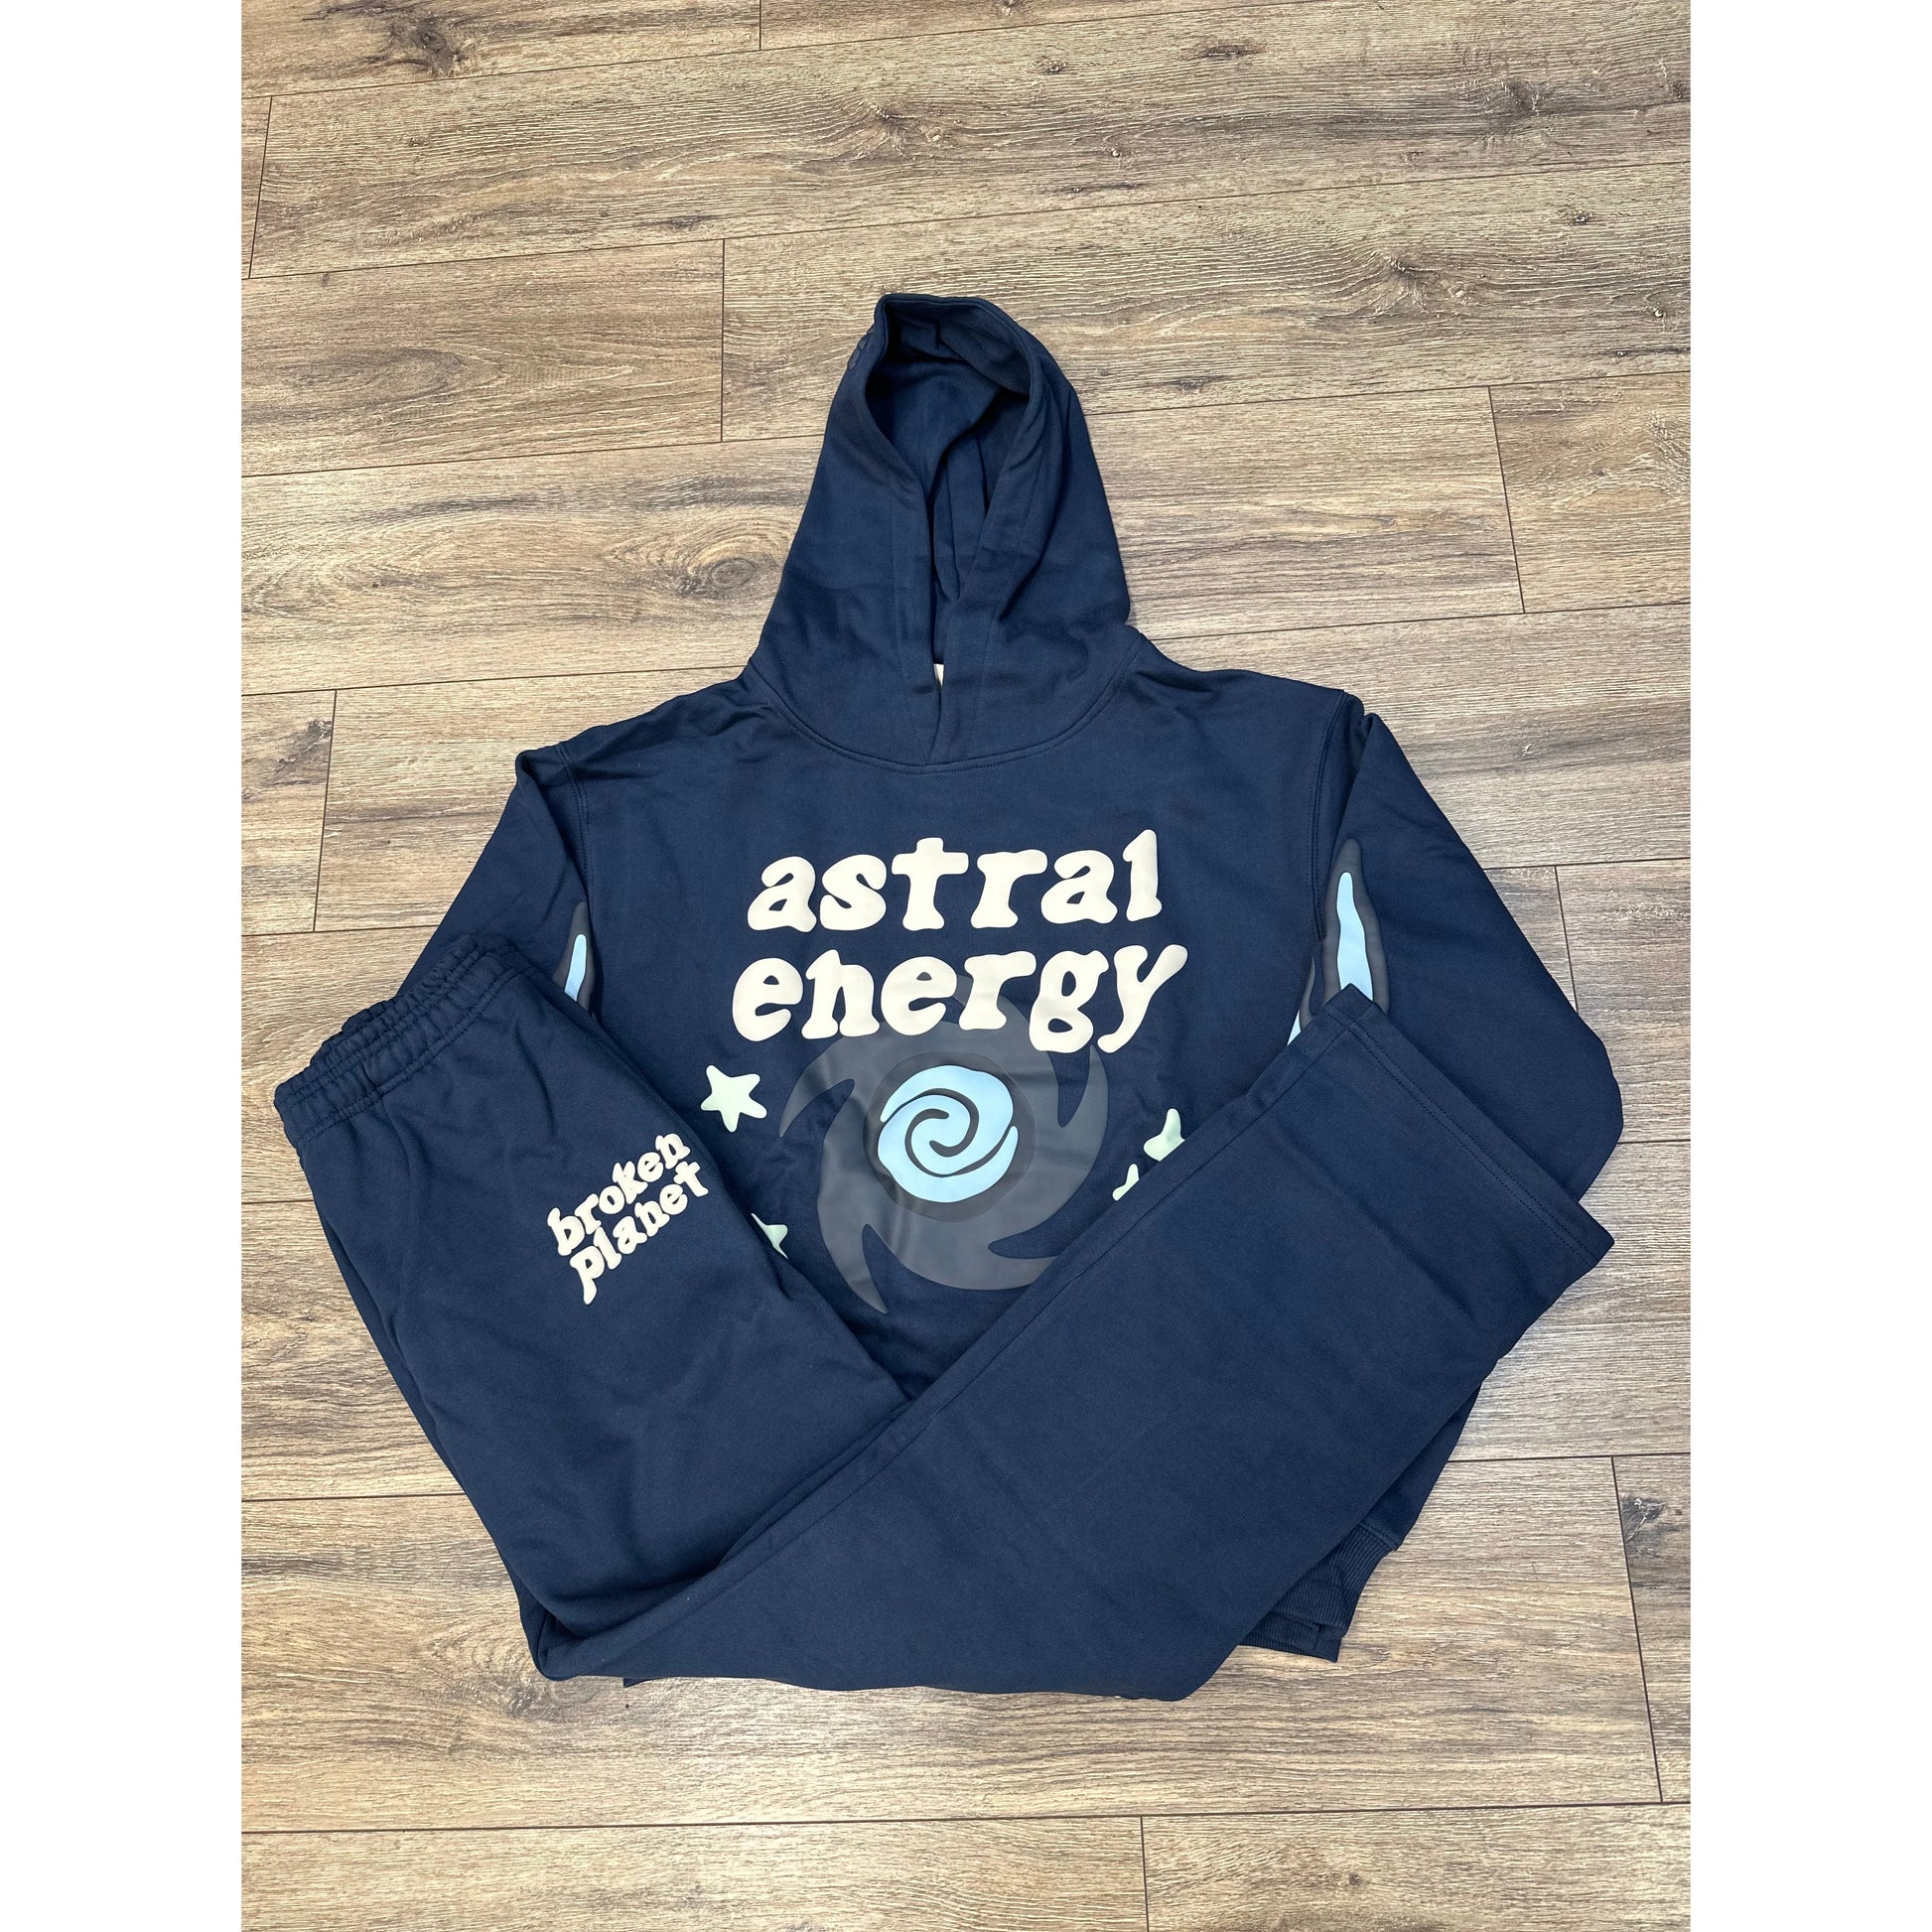 Broken Planet Market Astral Energy Full Set Outer Space Blue by Broken Planet Market from £250.00